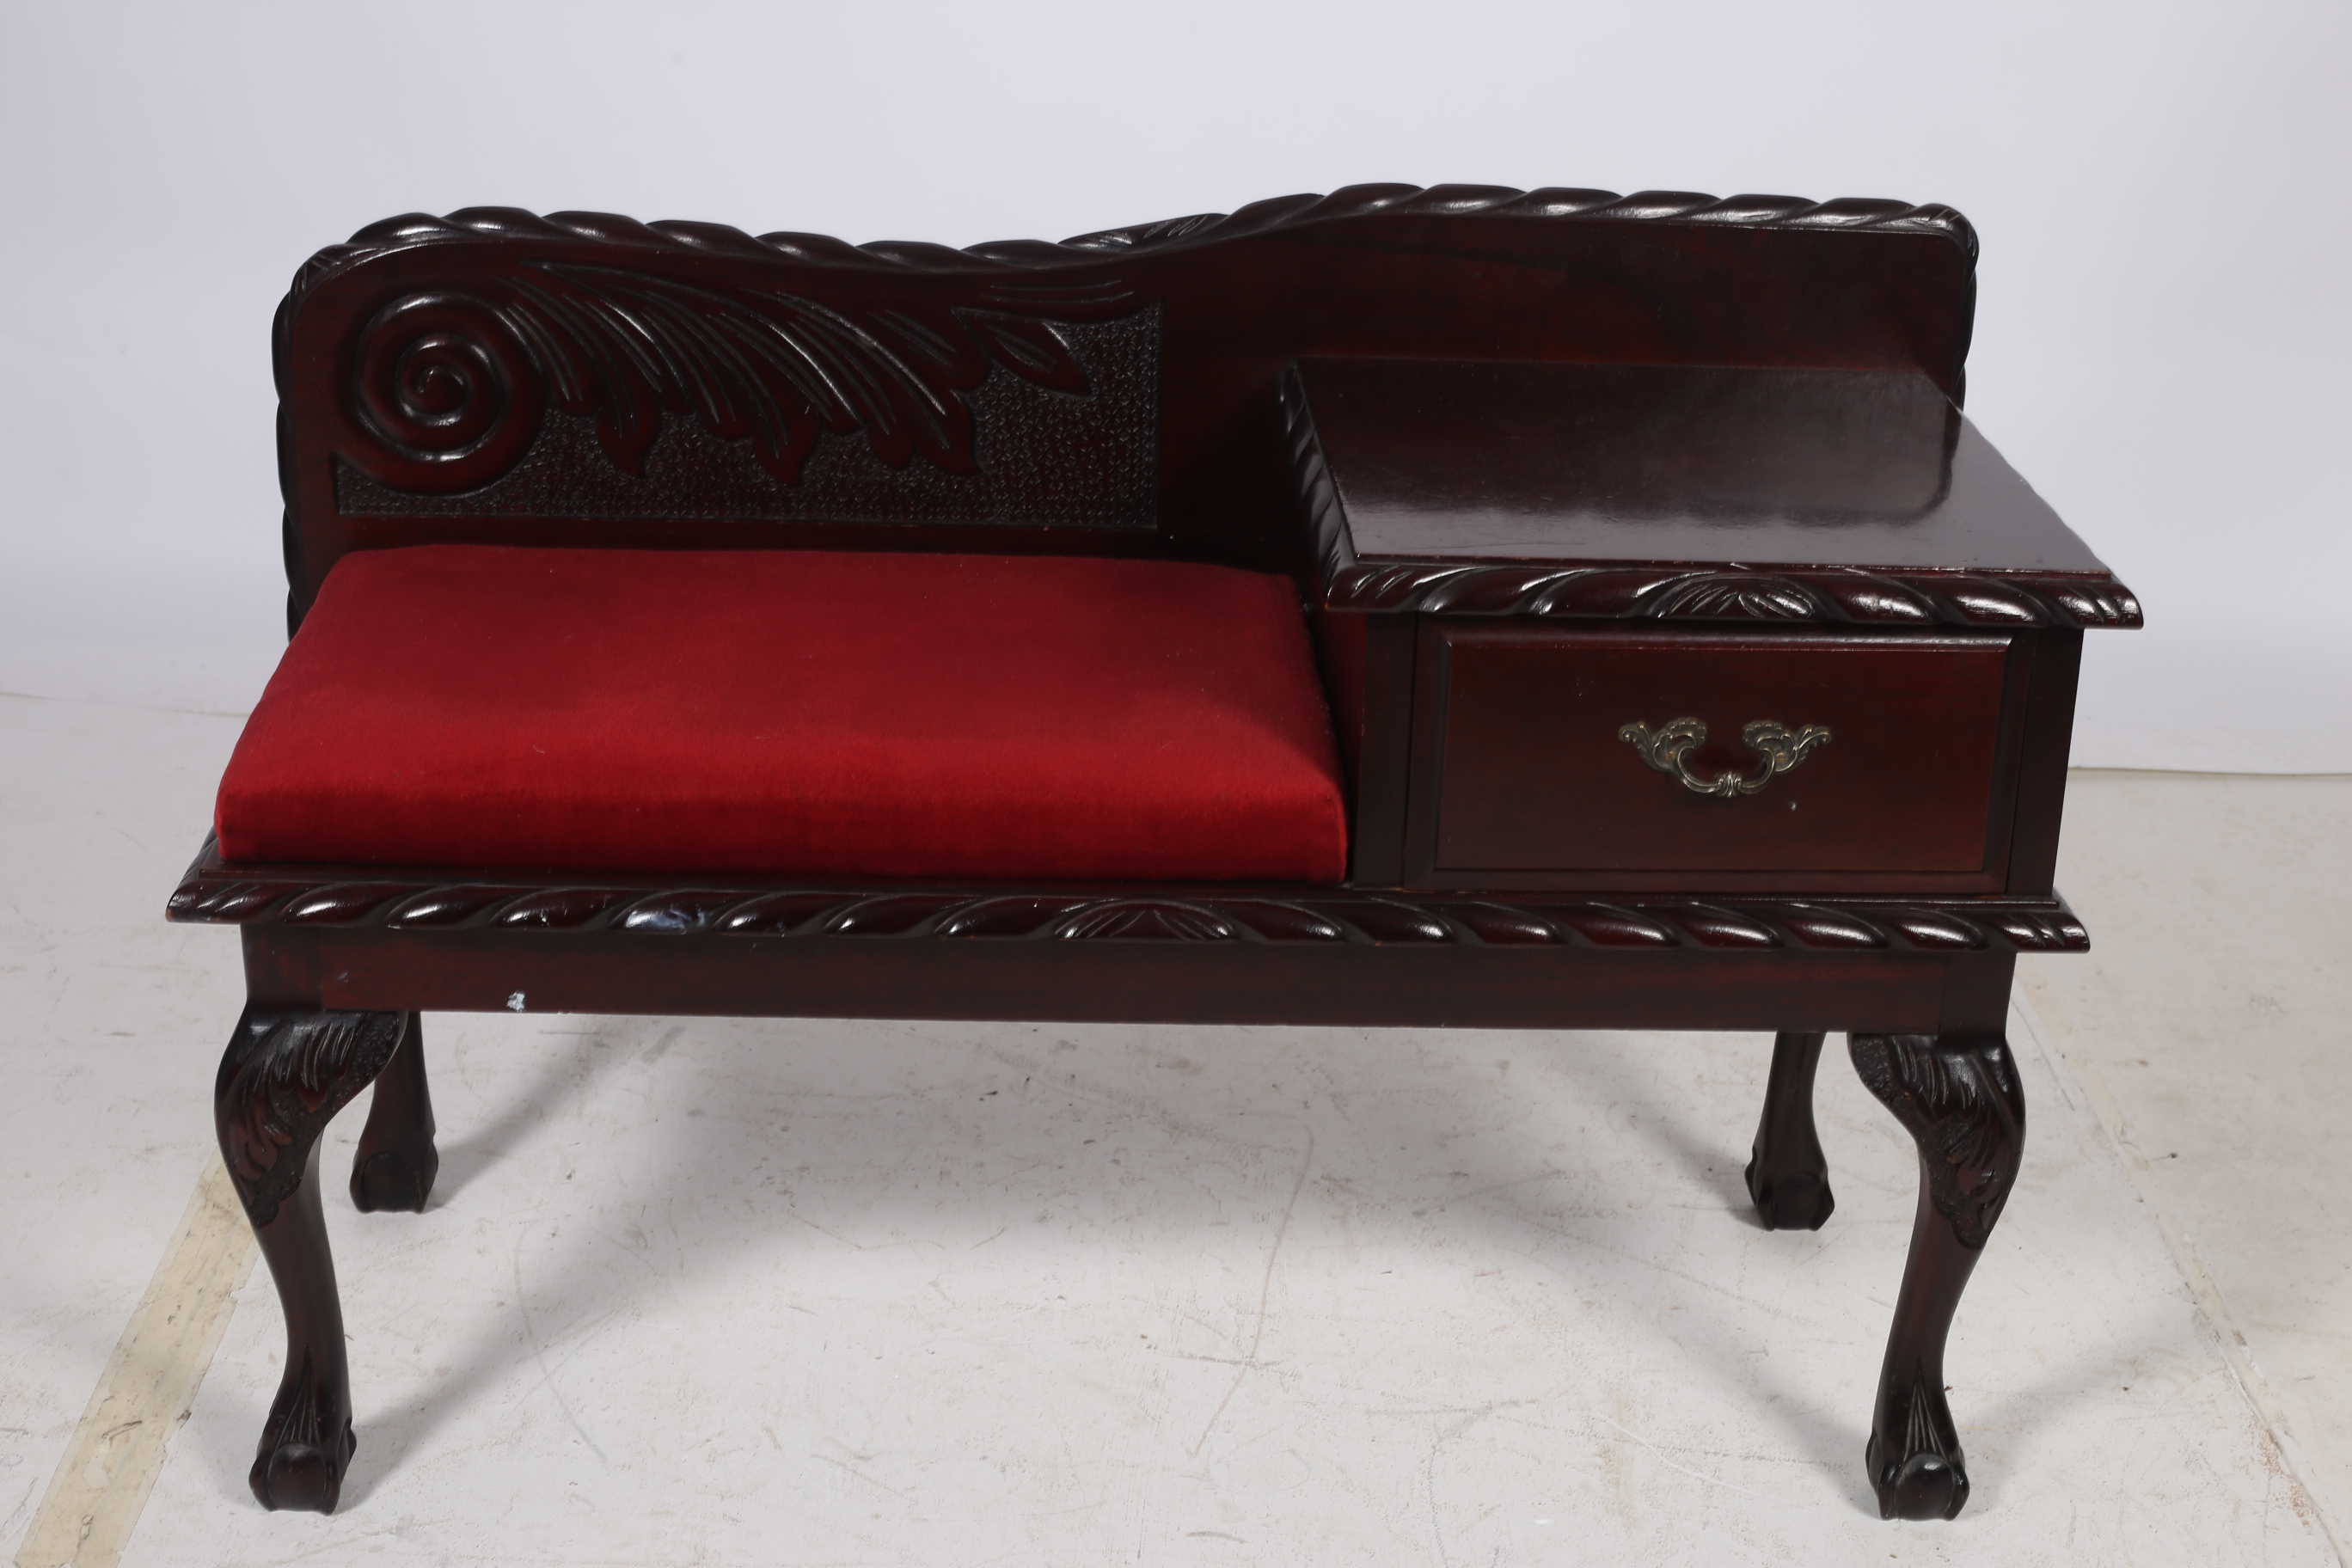 A CHIPPENDALE DESIGN MAHOGANY TELEPHONE SEAT with upholstered seat and frieze drawer on cabriole